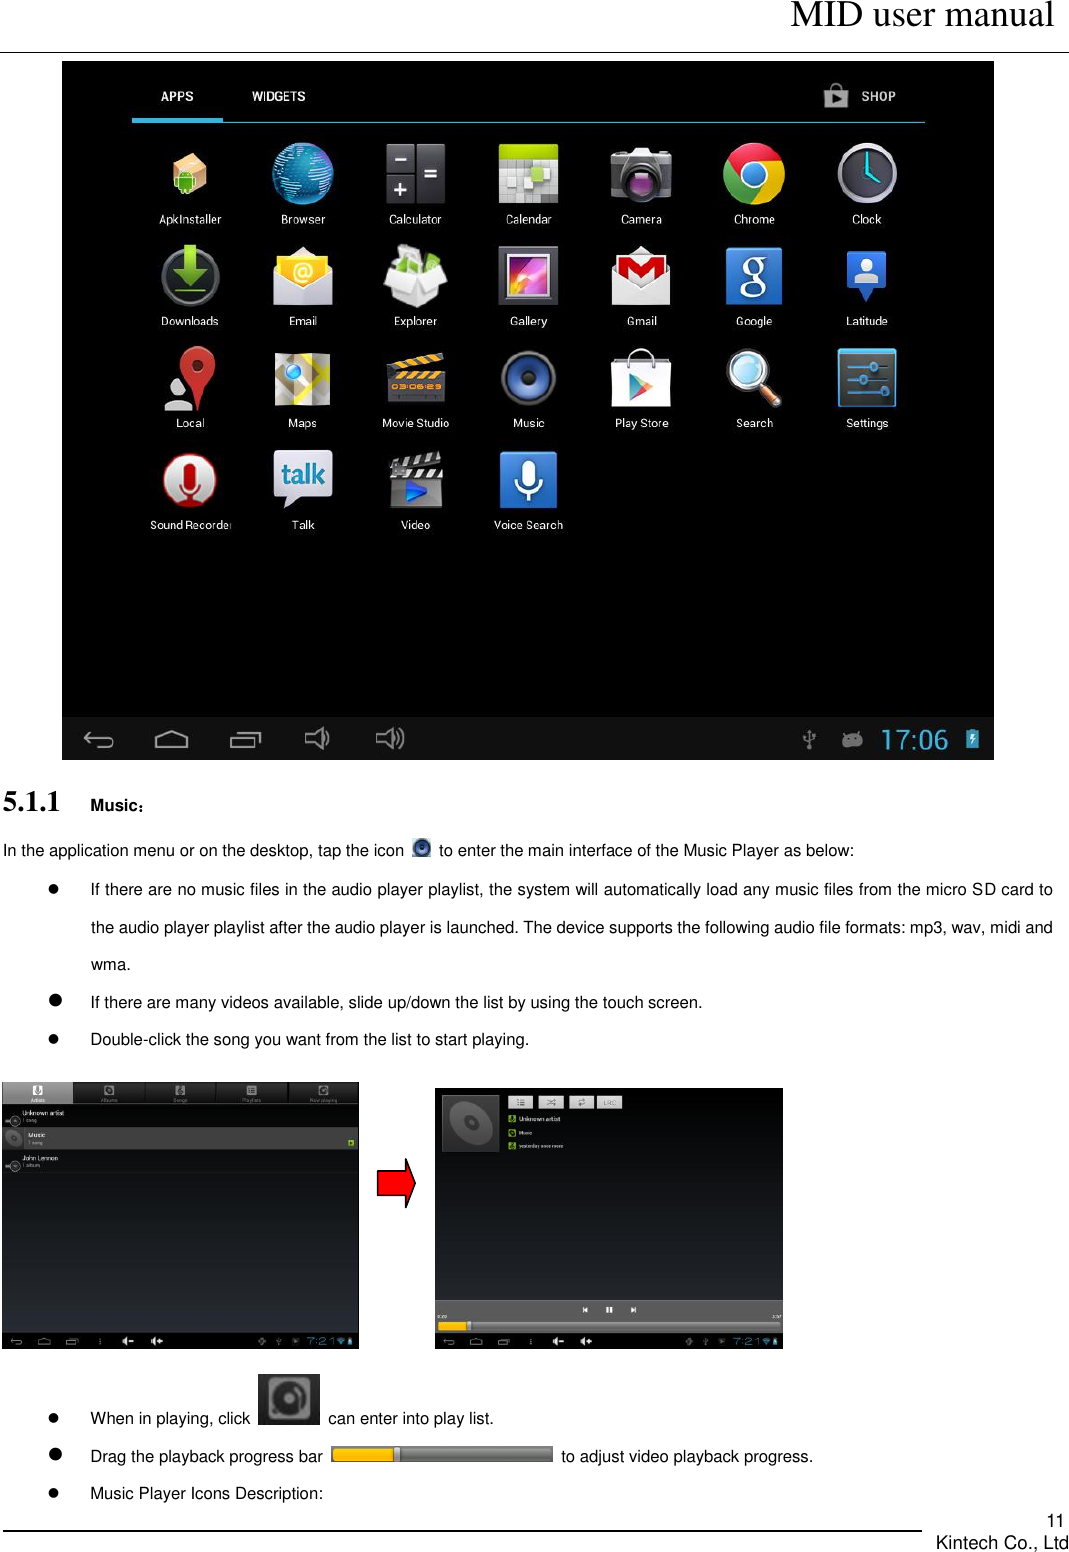      MID user manual       Kintech Co., Ltd   11  5.1.1    Music： In the application menu or on the desktop, tap the icon    to enter the main interface of the Music Player as below:   If there are no music files in the audio player playlist, the system will automatically load any music files from the micro SD card to the audio player playlist after the audio player is launched. The device supports the following audio file formats: mp3, wav, midi and wma.  If there are many videos available, slide up/down the list by using the touch screen.   Double-click the song you want from the list to start playing.                    When in playing, click    can enter into play list.  Drag the playback progress bar    to adjust video playback progress.   Music Player Icons Description: 